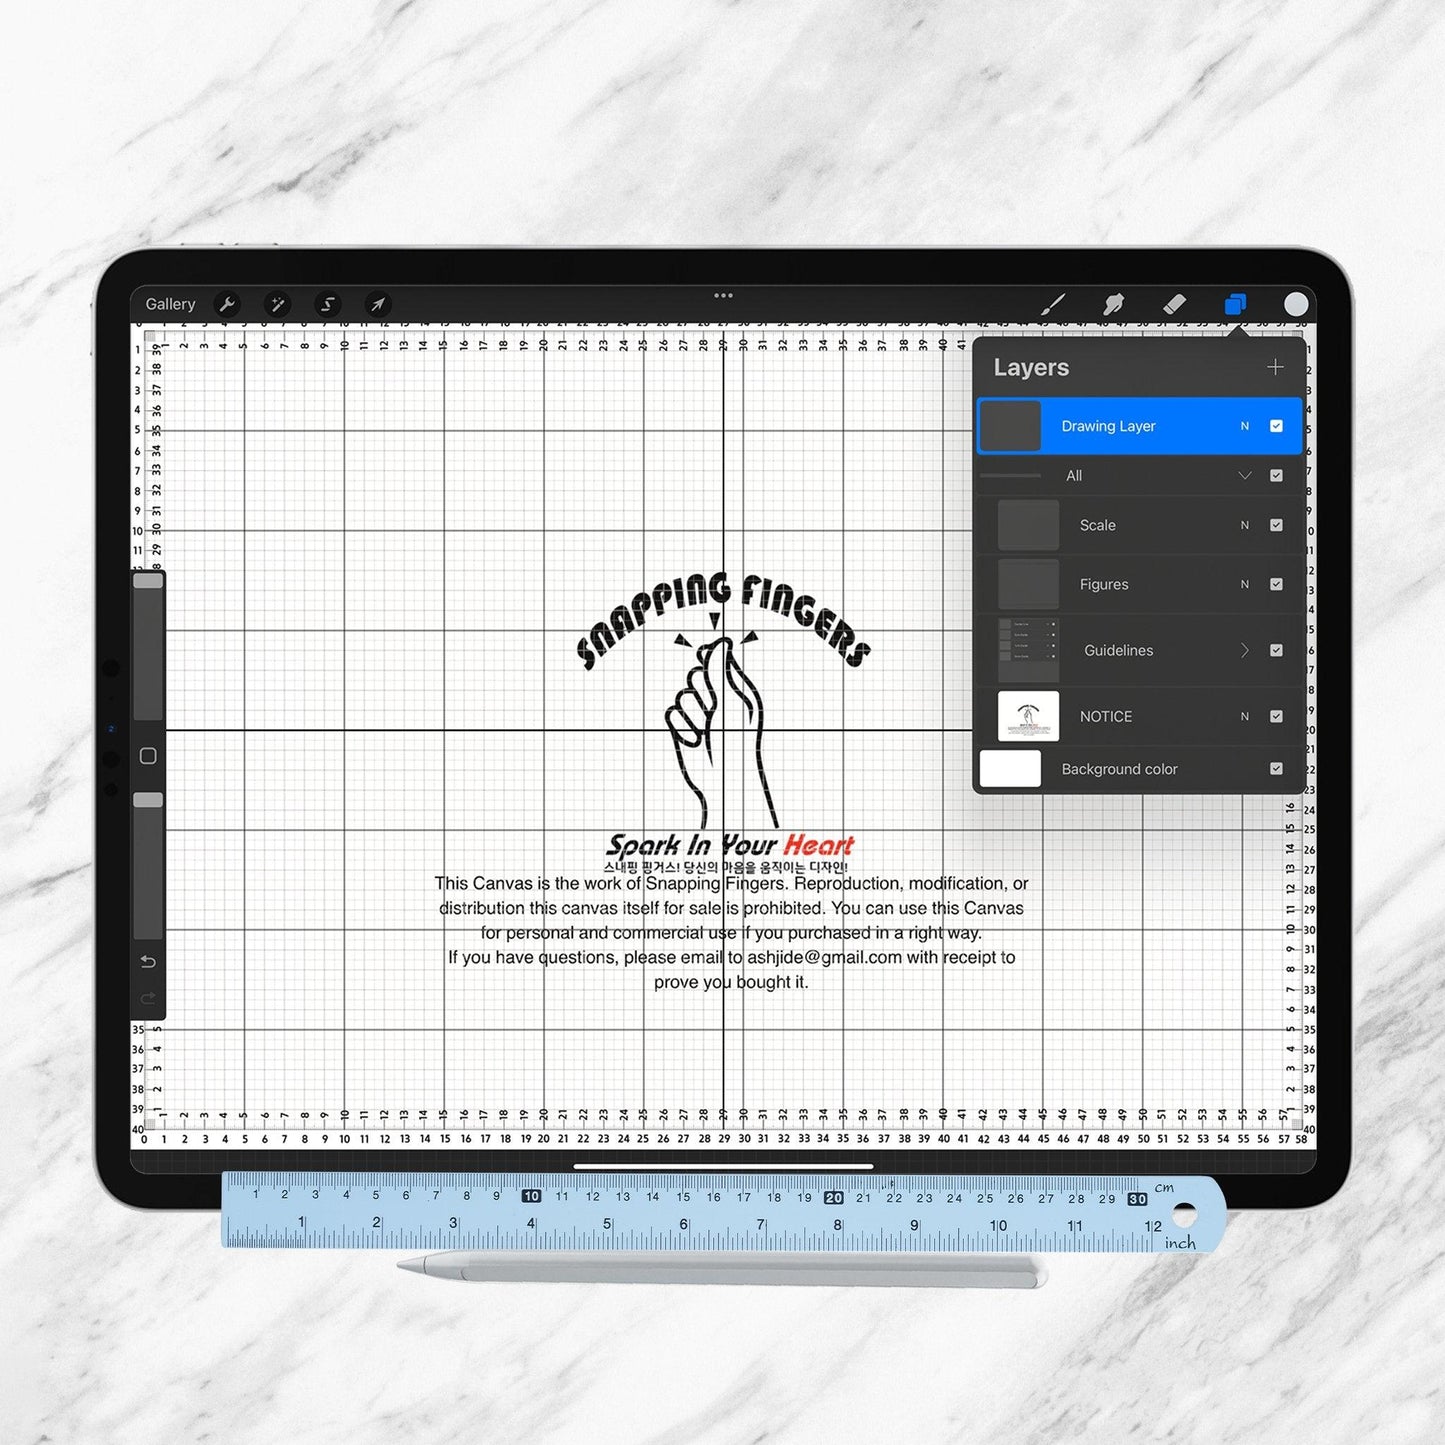 A2 Size Procreate Ruler & Grid Canvas | in Centimeters with 24 High-Quality Brushes for Professional Illustration and Design - snappingfingers_shop